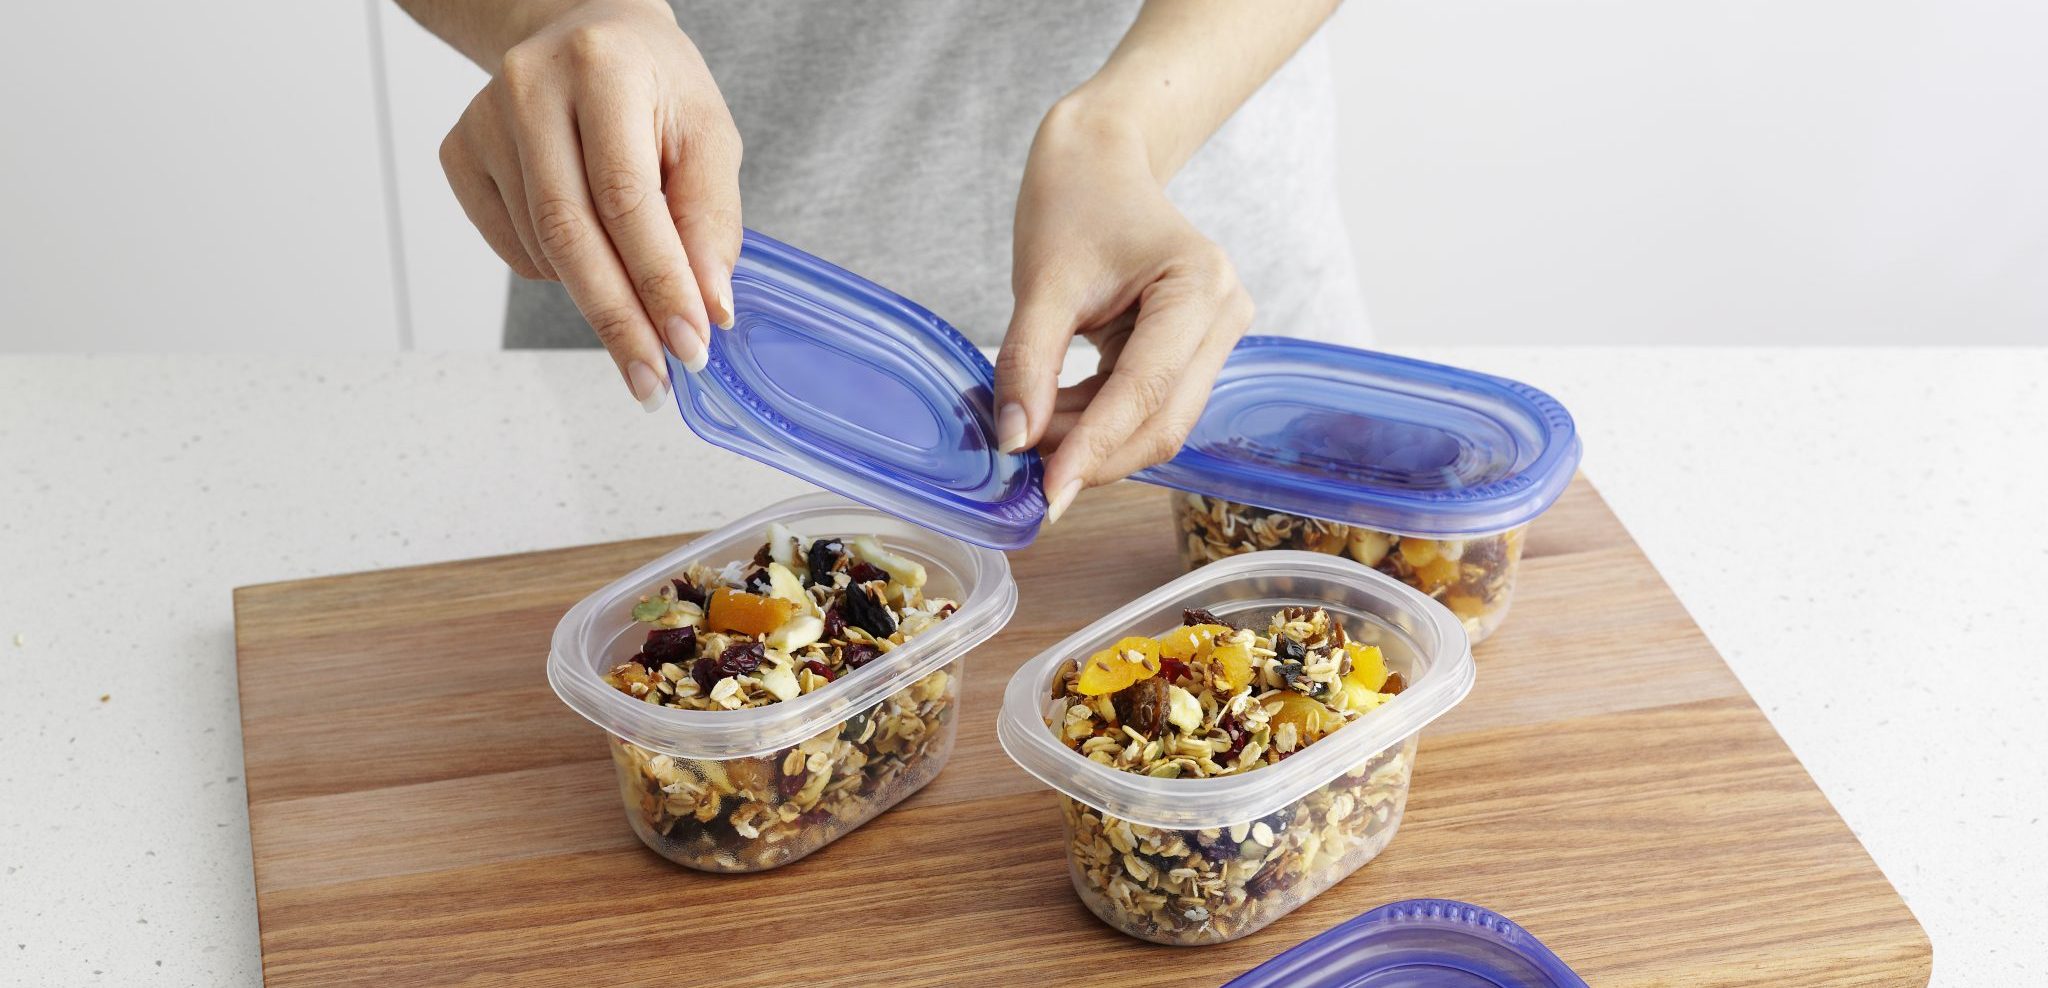 What’s So Bad About Plastic Food Containers?